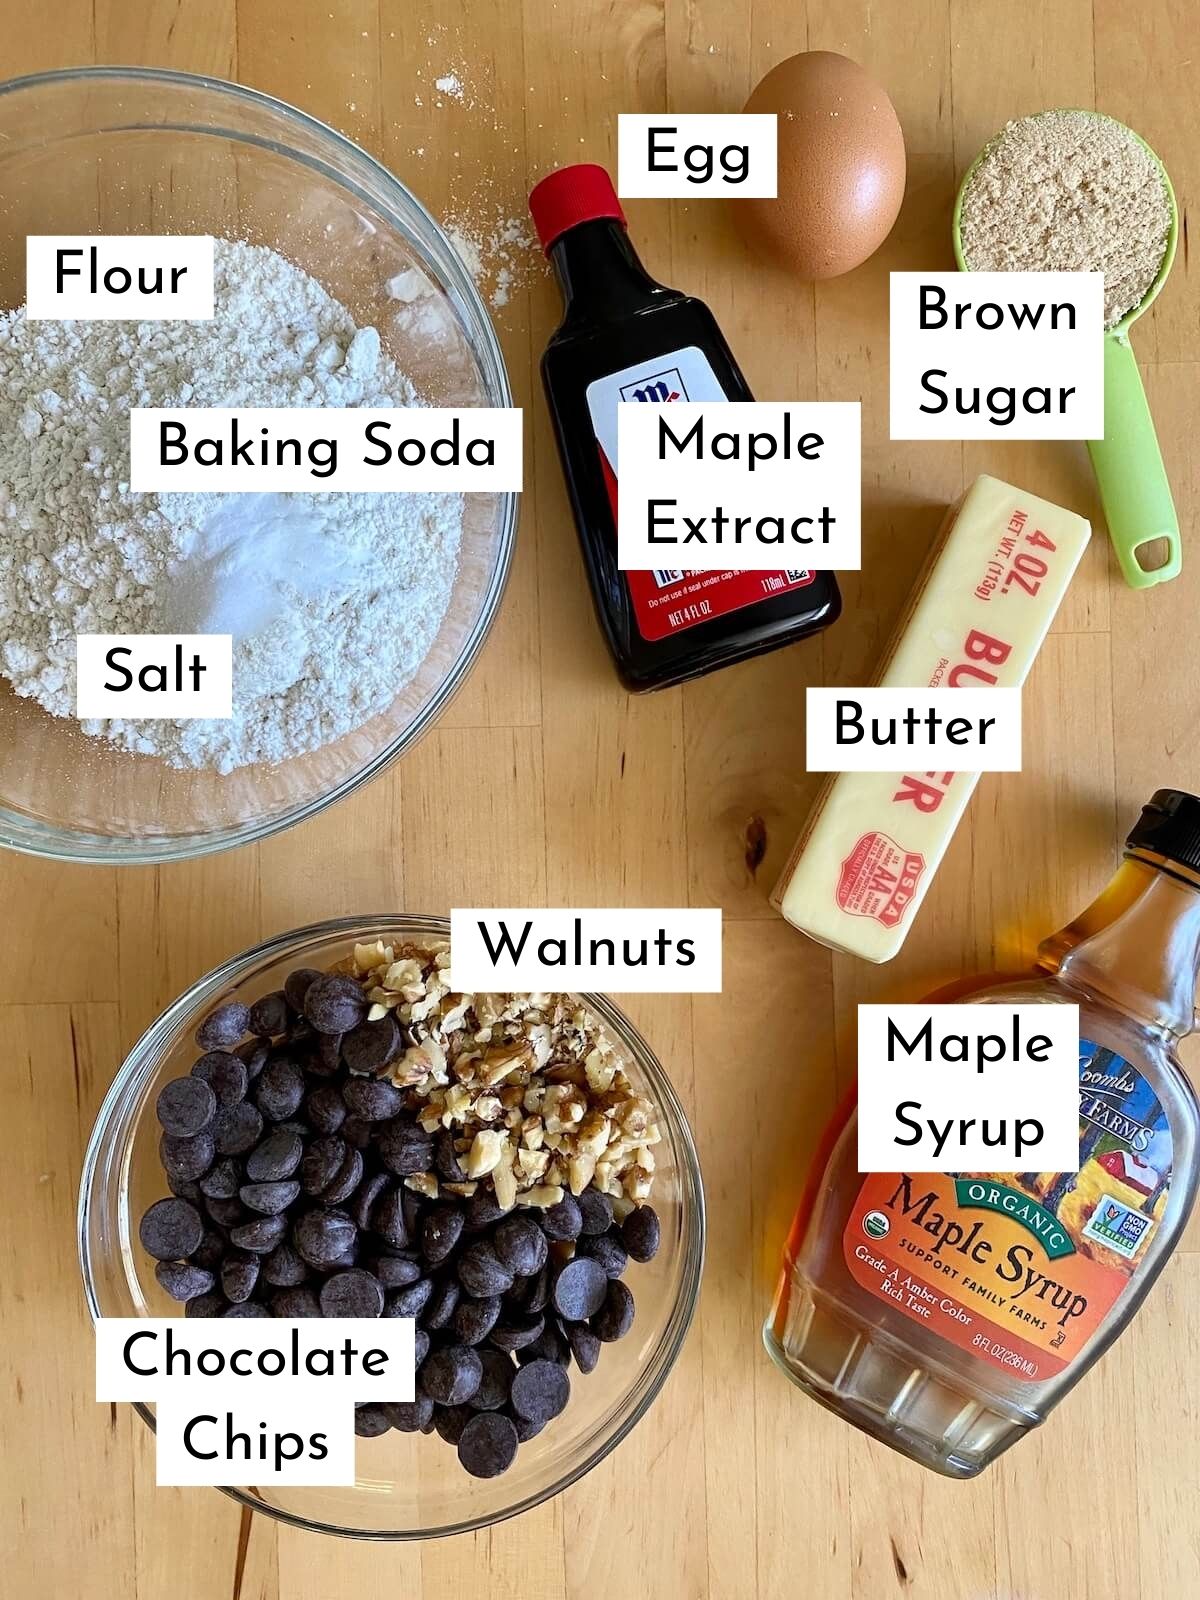 The ingredients to make maple syrup chocolate chip cookies on a butcher block countertop. There is text over each ingredient, stating what it is. The ingredients include flour, baking soda, salt, egg, brown sugar, maple extract, butter, maple syrup, walnuts, and chocolate chips.